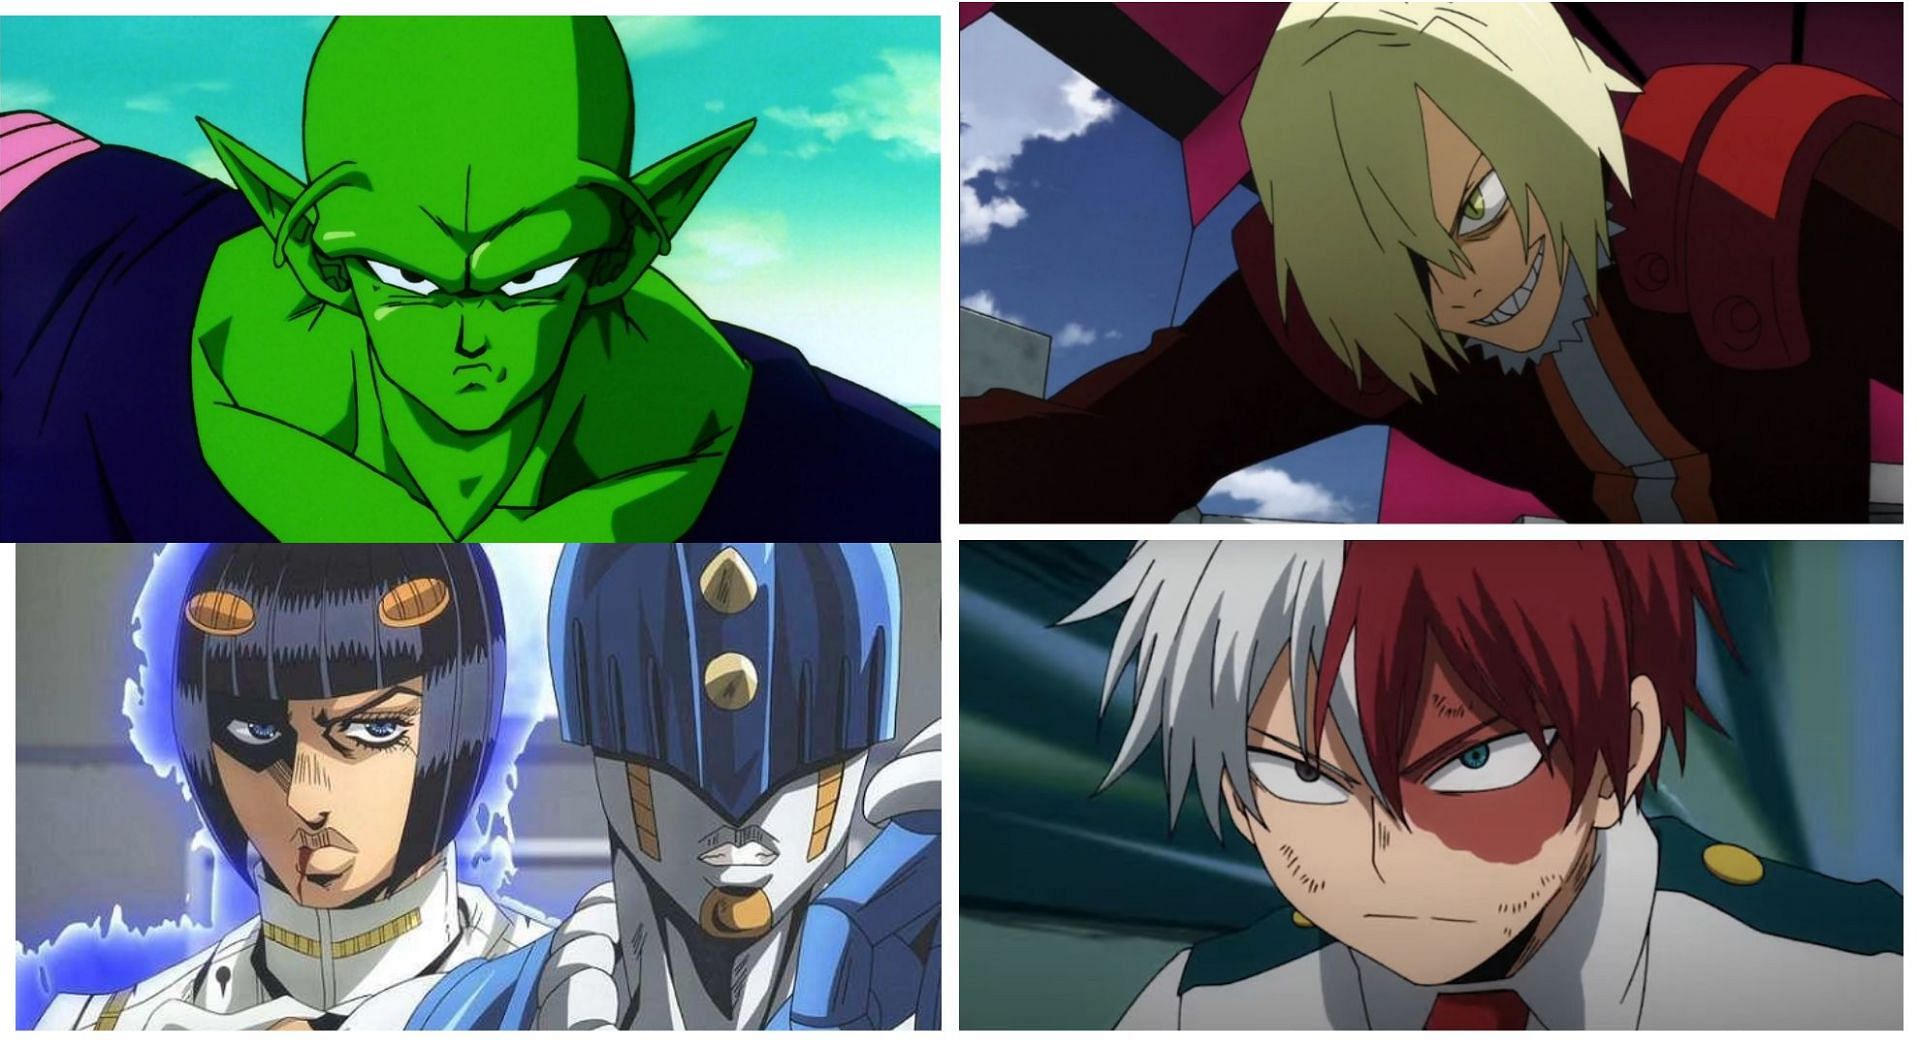 These 19+ Hot Female Anime Villains Are Dangerous Beauties